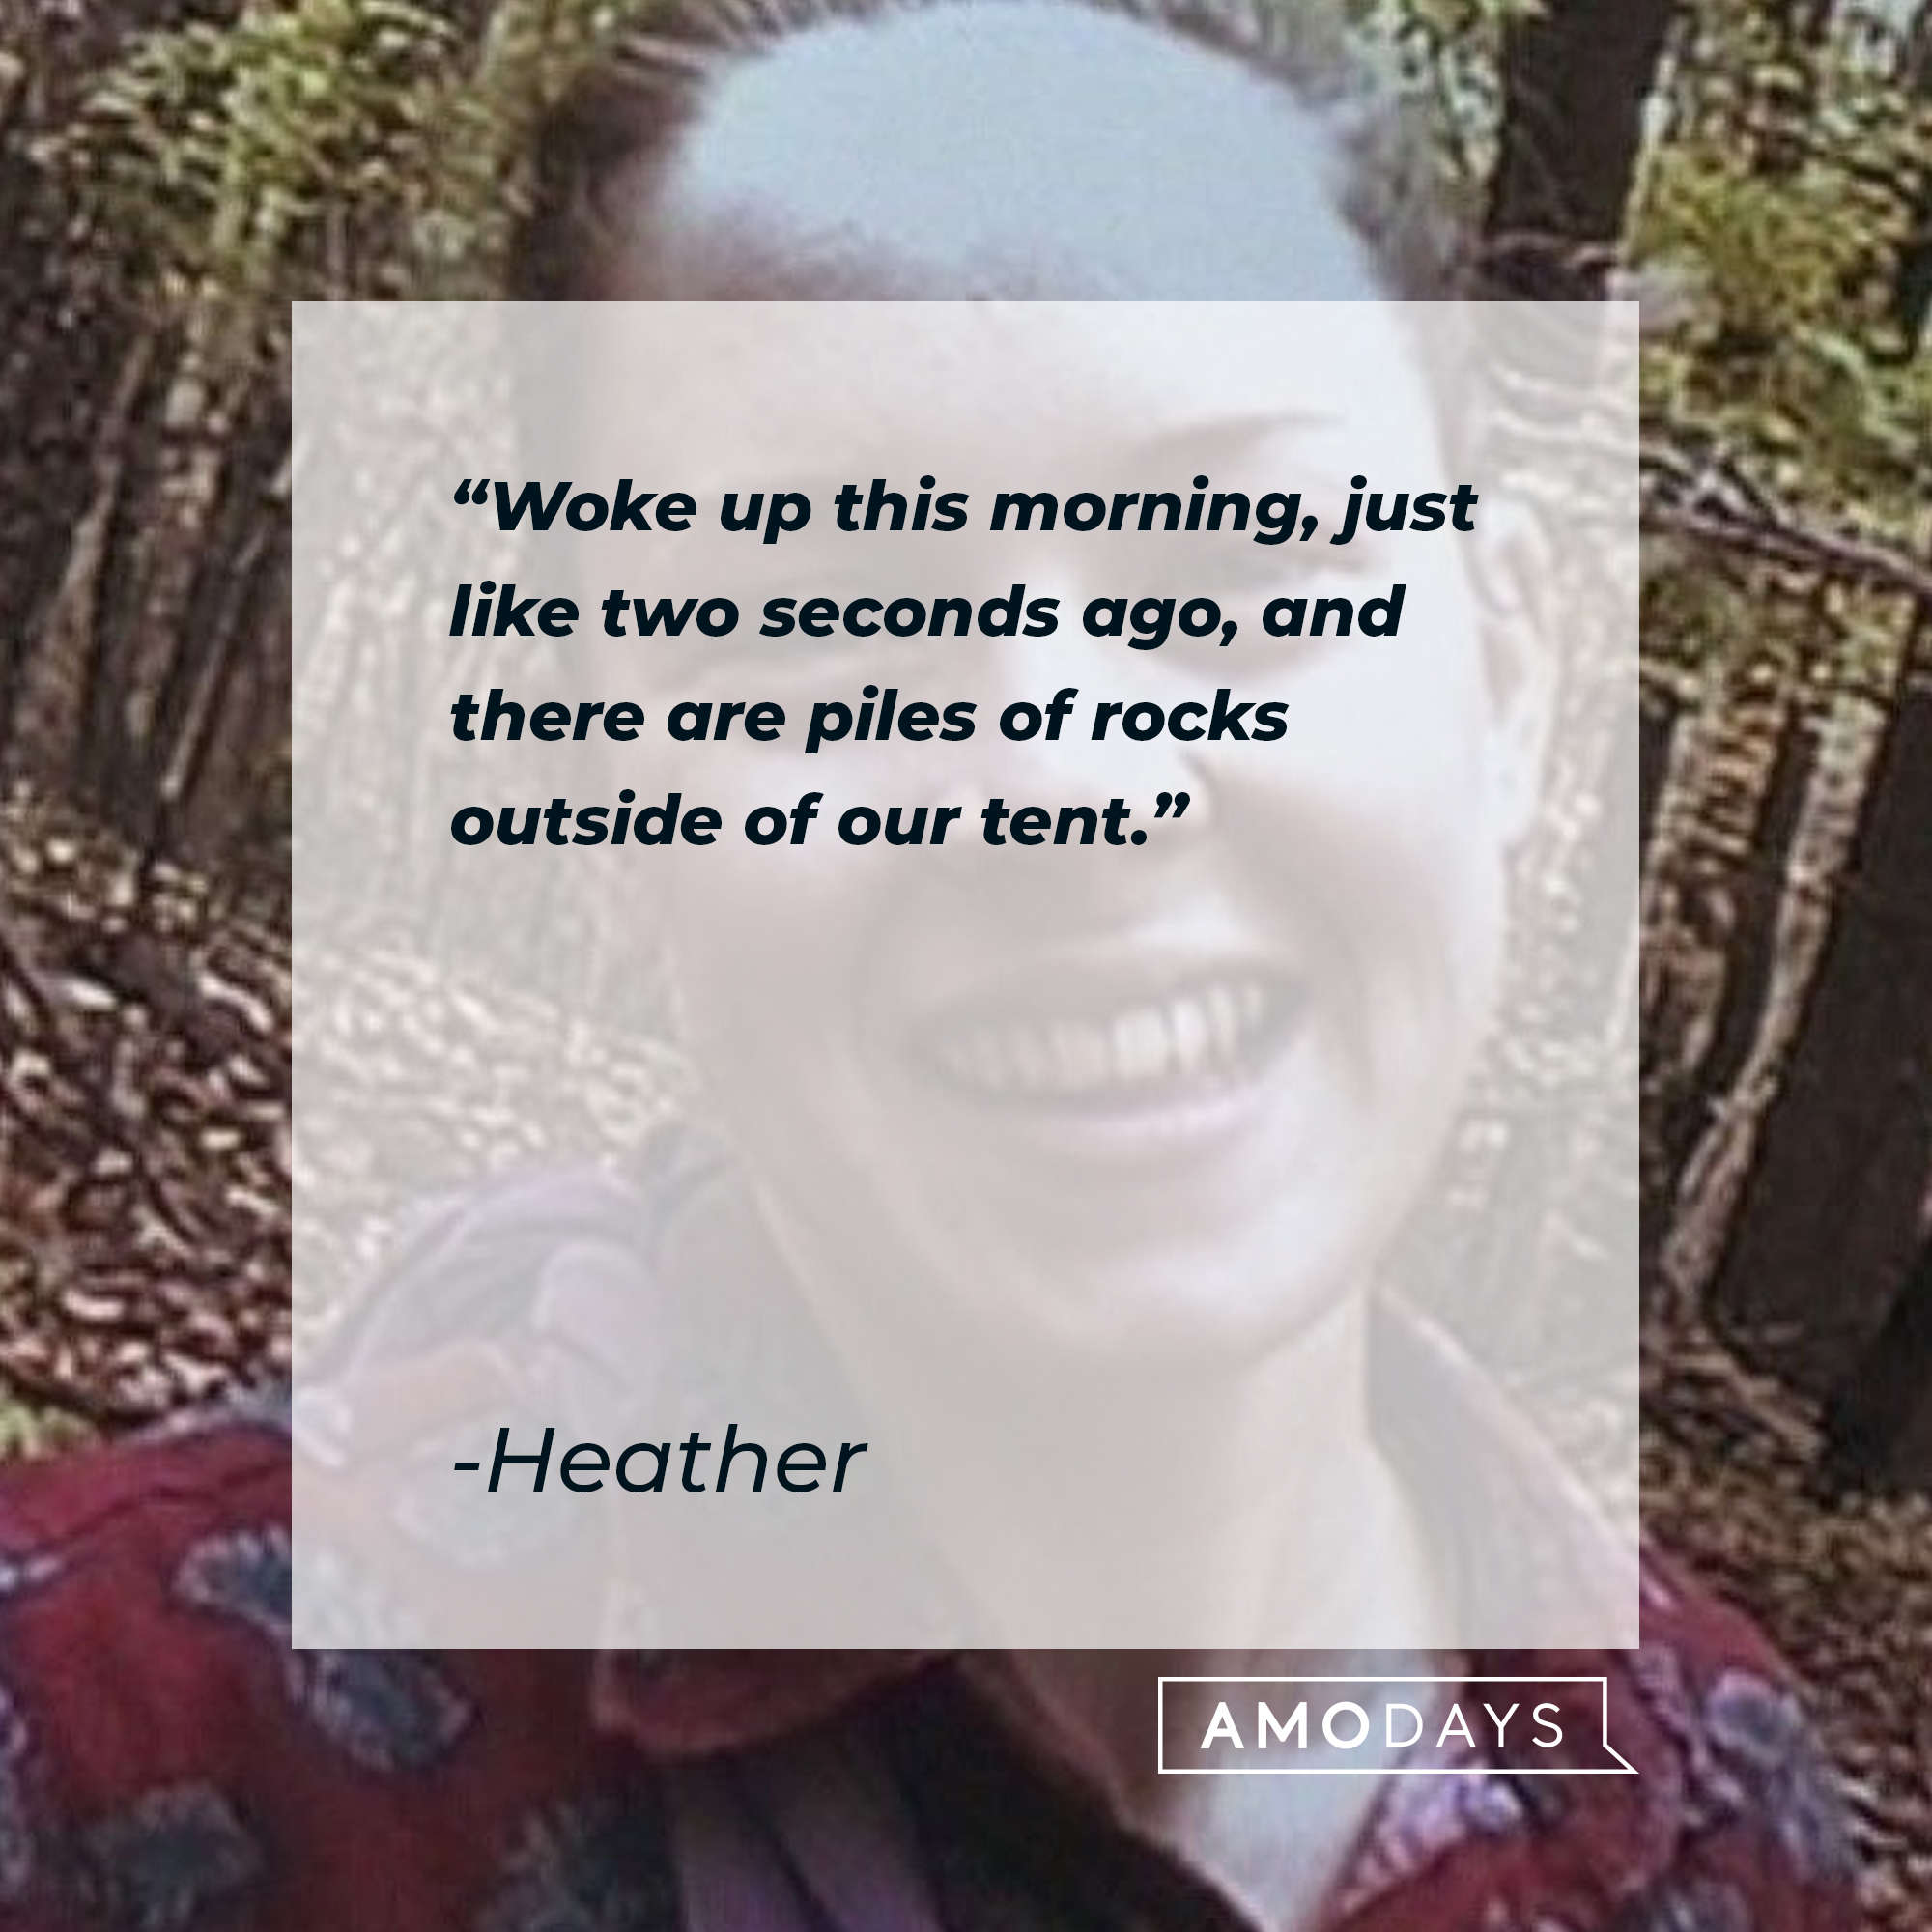 Heather's quote: "Woke up this morning, just like two seconds ago, and there are piles of rocks outside of our tent." | Source: facebook.com/blairwitchmovie